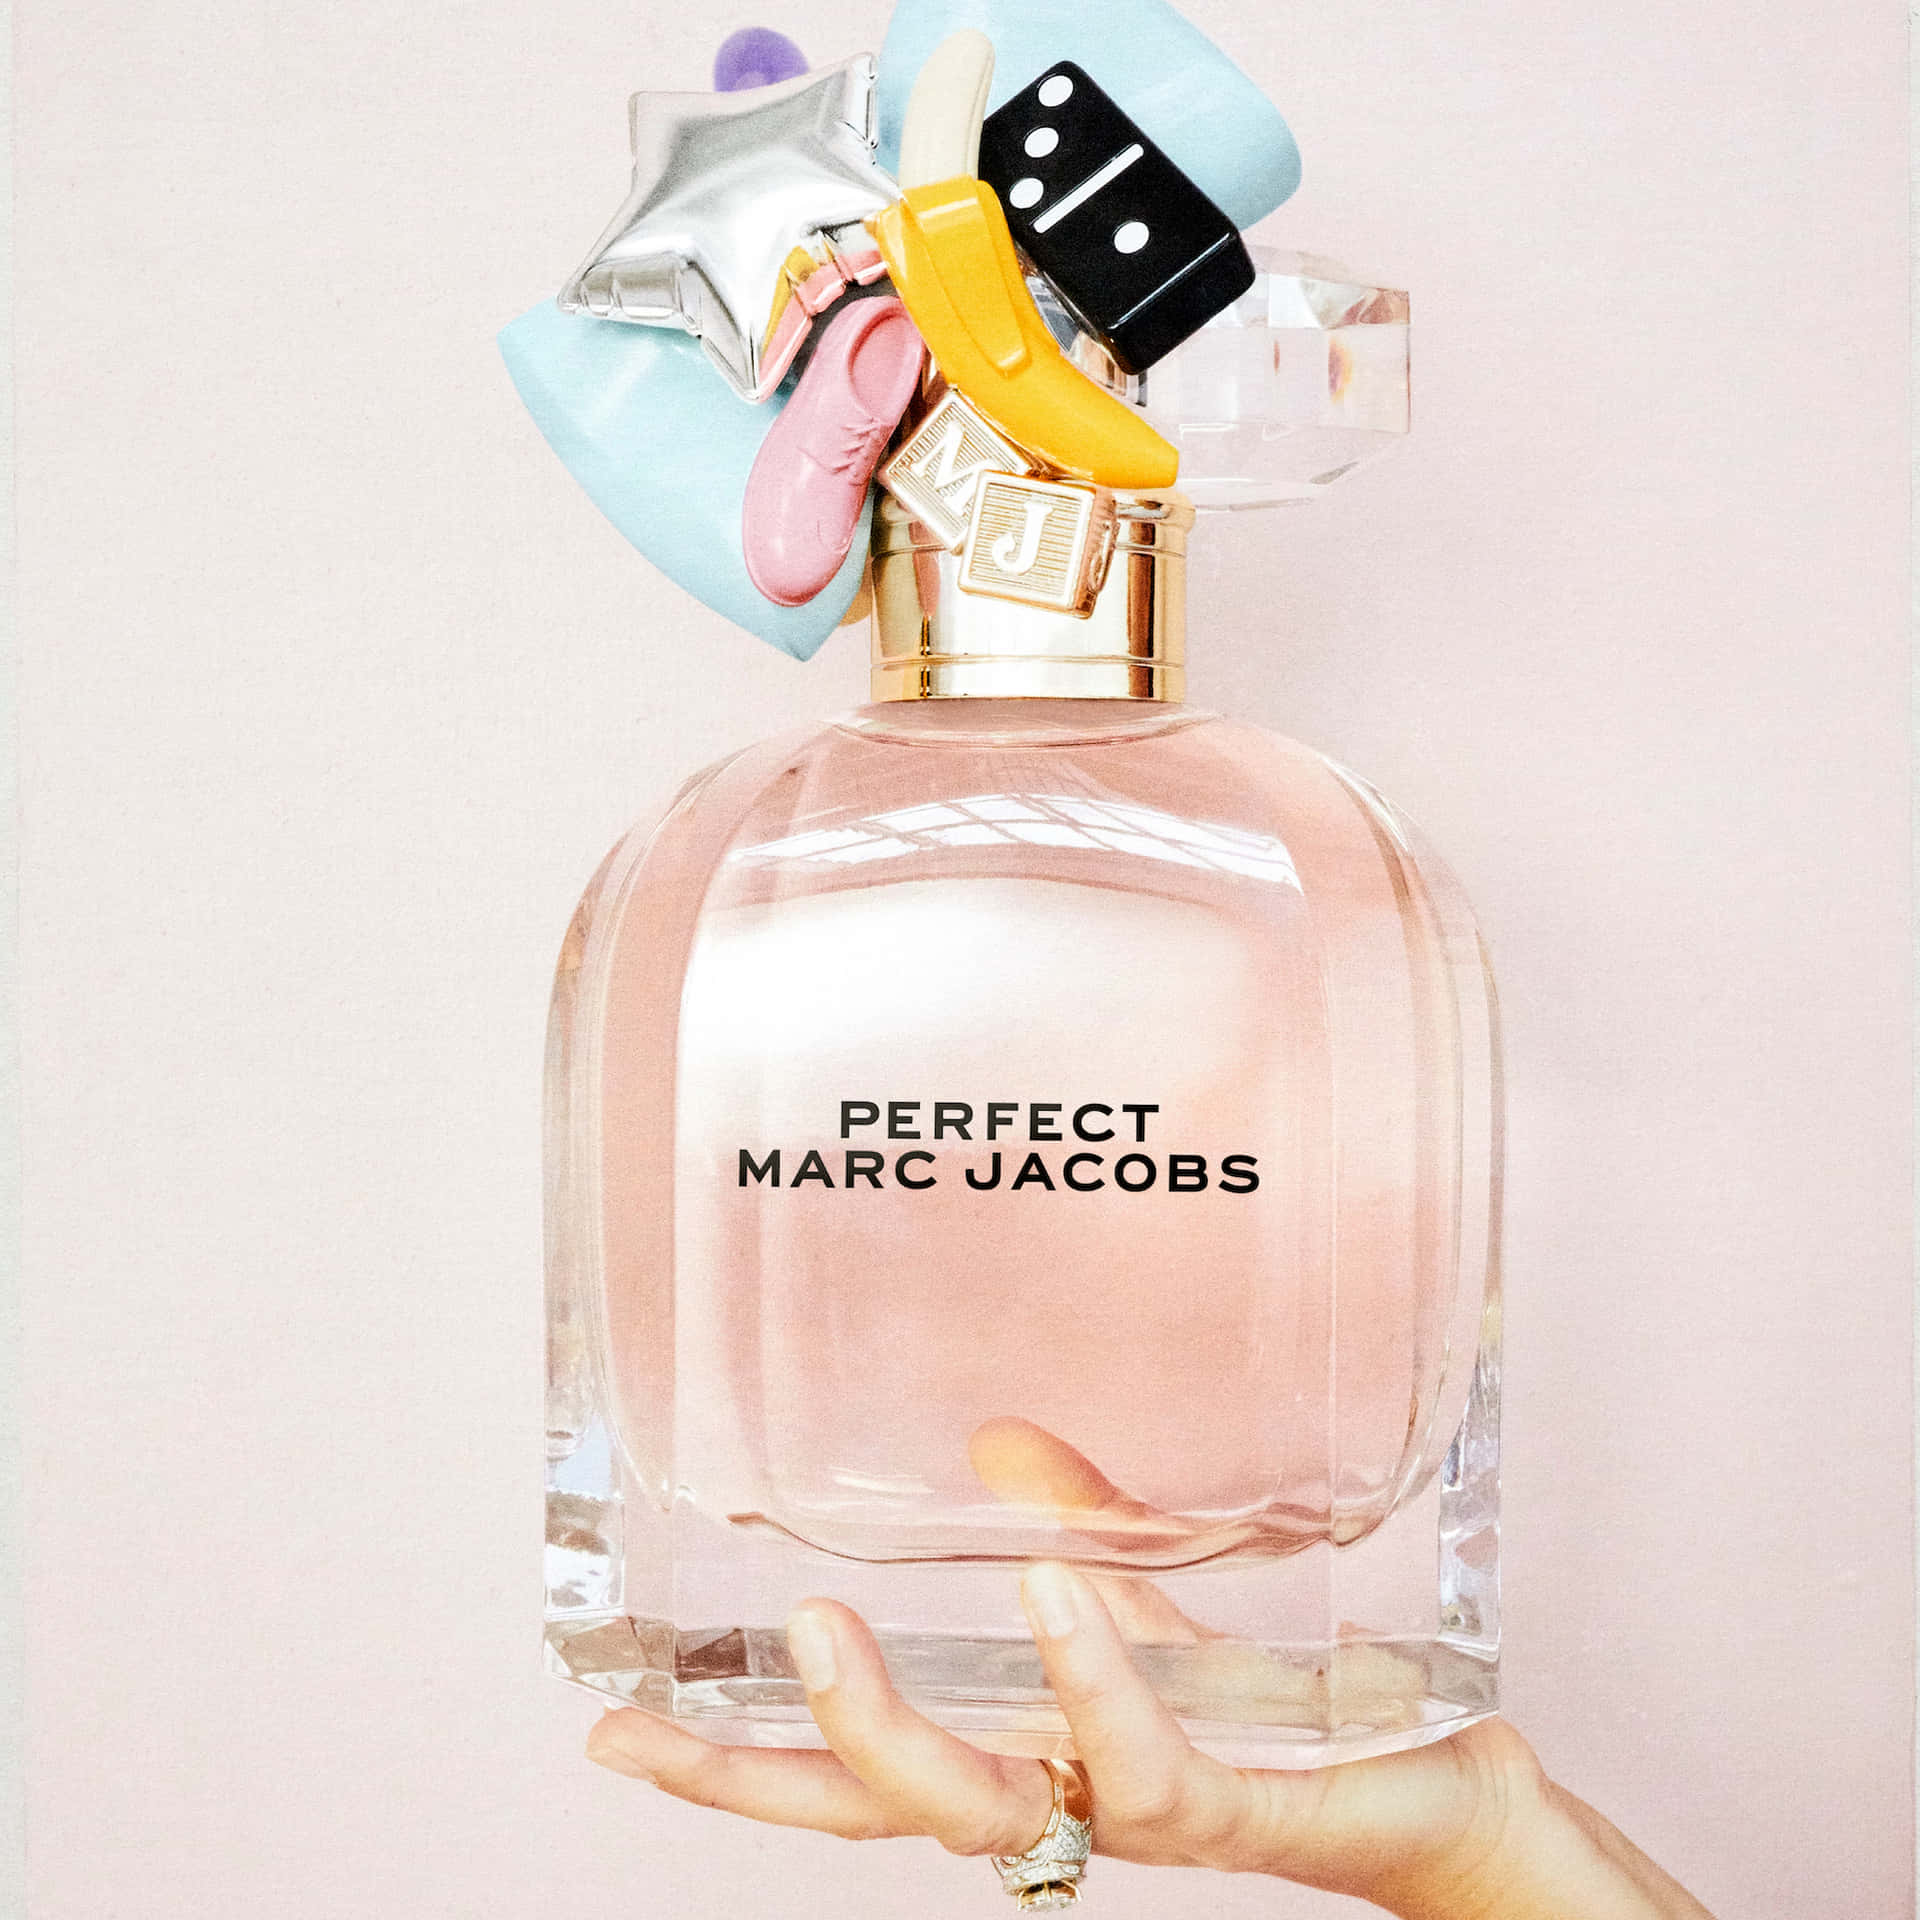 Download Marc Jacobs Perfect Perfume - Ad | Wallpapers.com